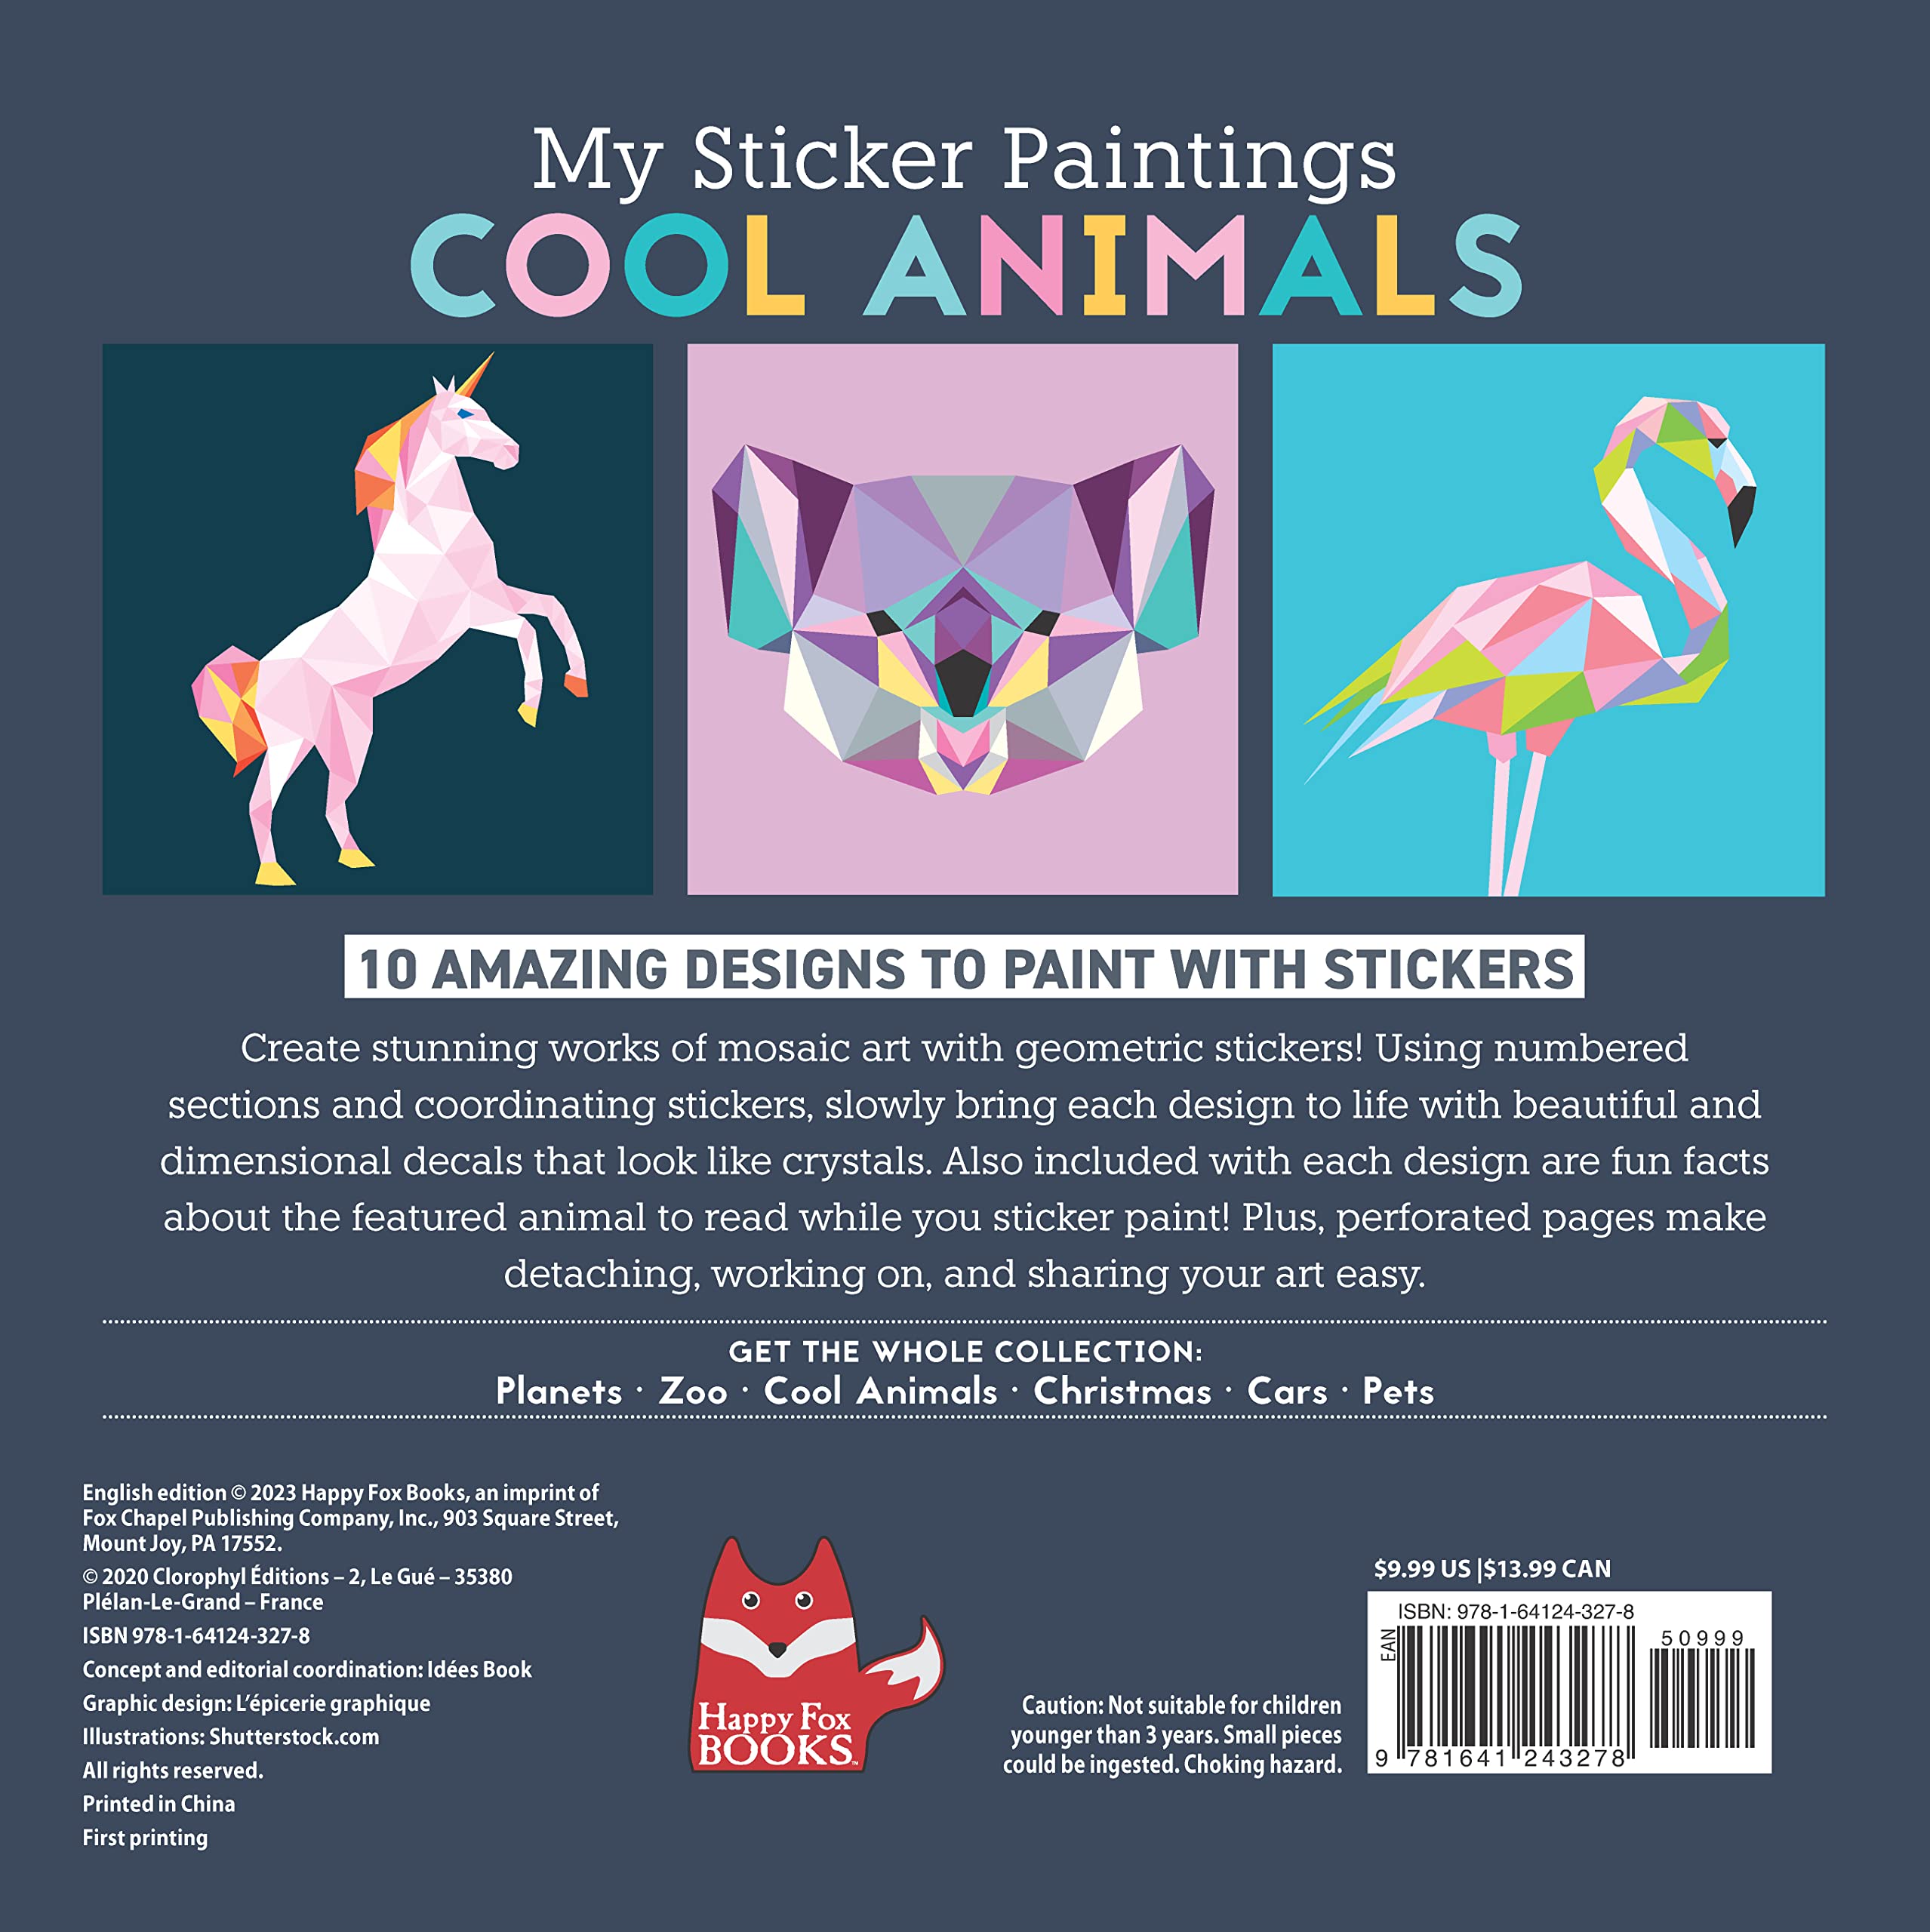 My Sticker Paintings: Cool Animals: 10 Magnificent Paintings (Happy Fox Books) Paint by Sticker For Kids 6-10 - Llama, Koala, Unicorn, and More, with Up to 100 Removable, Reusable Stickers per Design